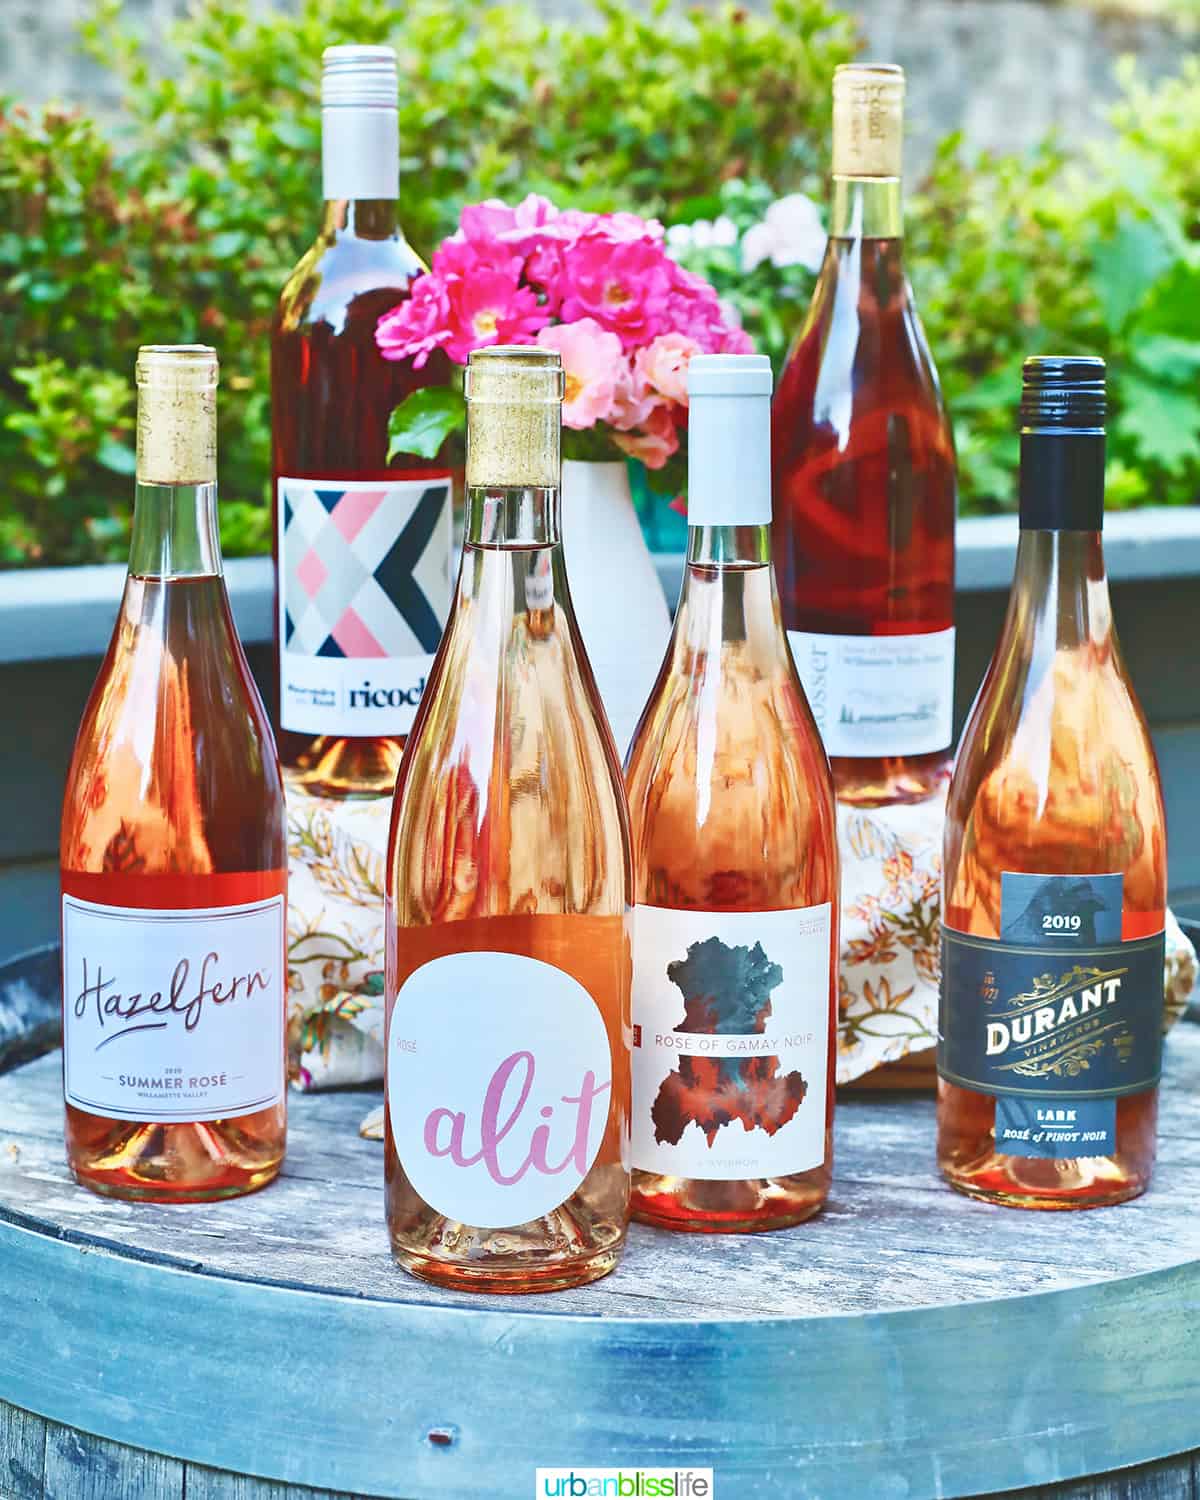 7 bottles of the best rosé wines to drink in 2021 on a wine barrel.